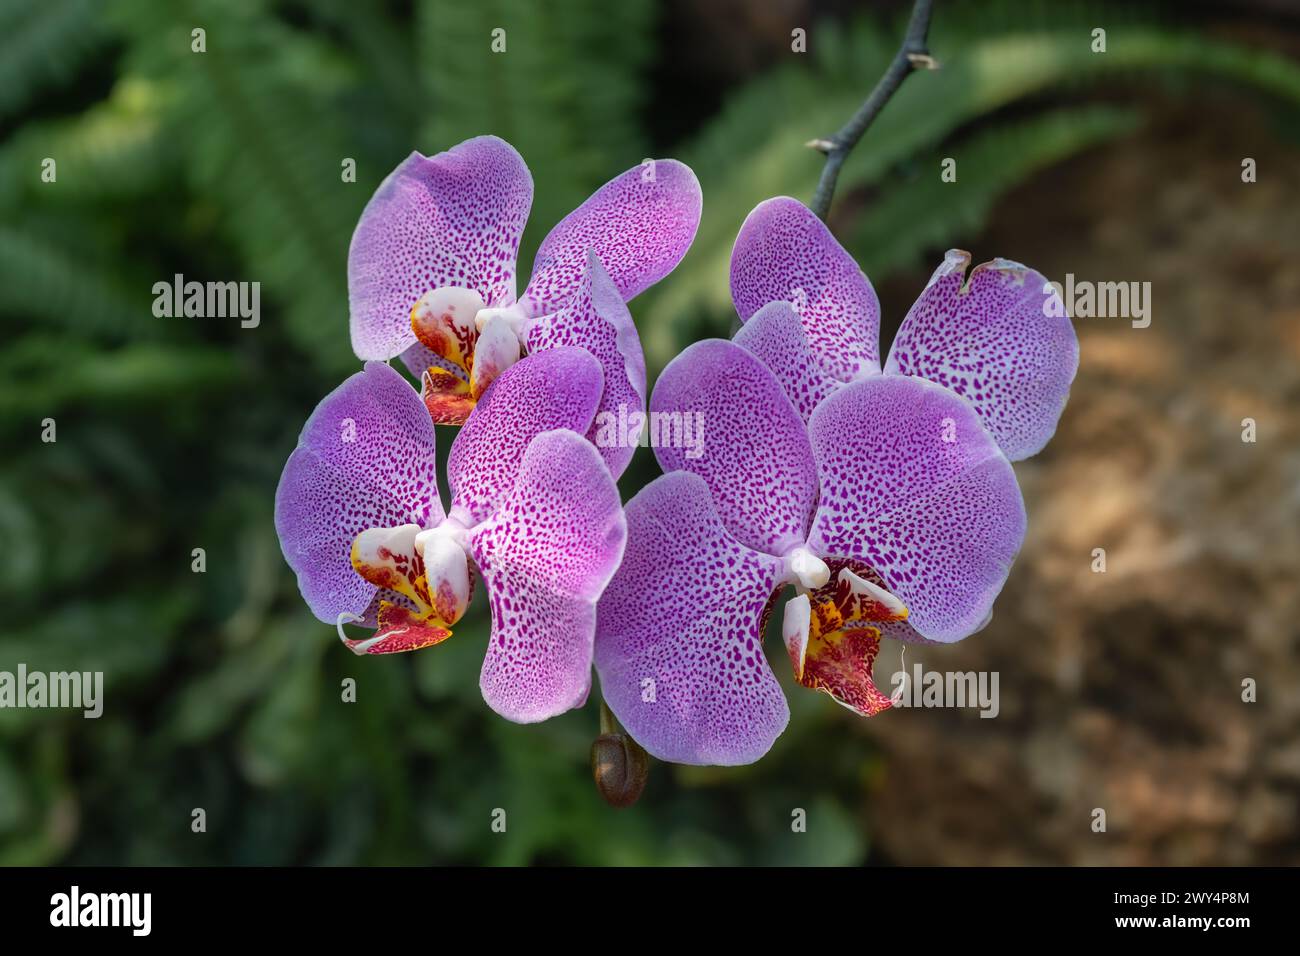 Closeup view of speckled purple pink flowers of phalaenopsis orchid hybrid aka moth orchid isolated outdoors in tropical garden Stock Photo